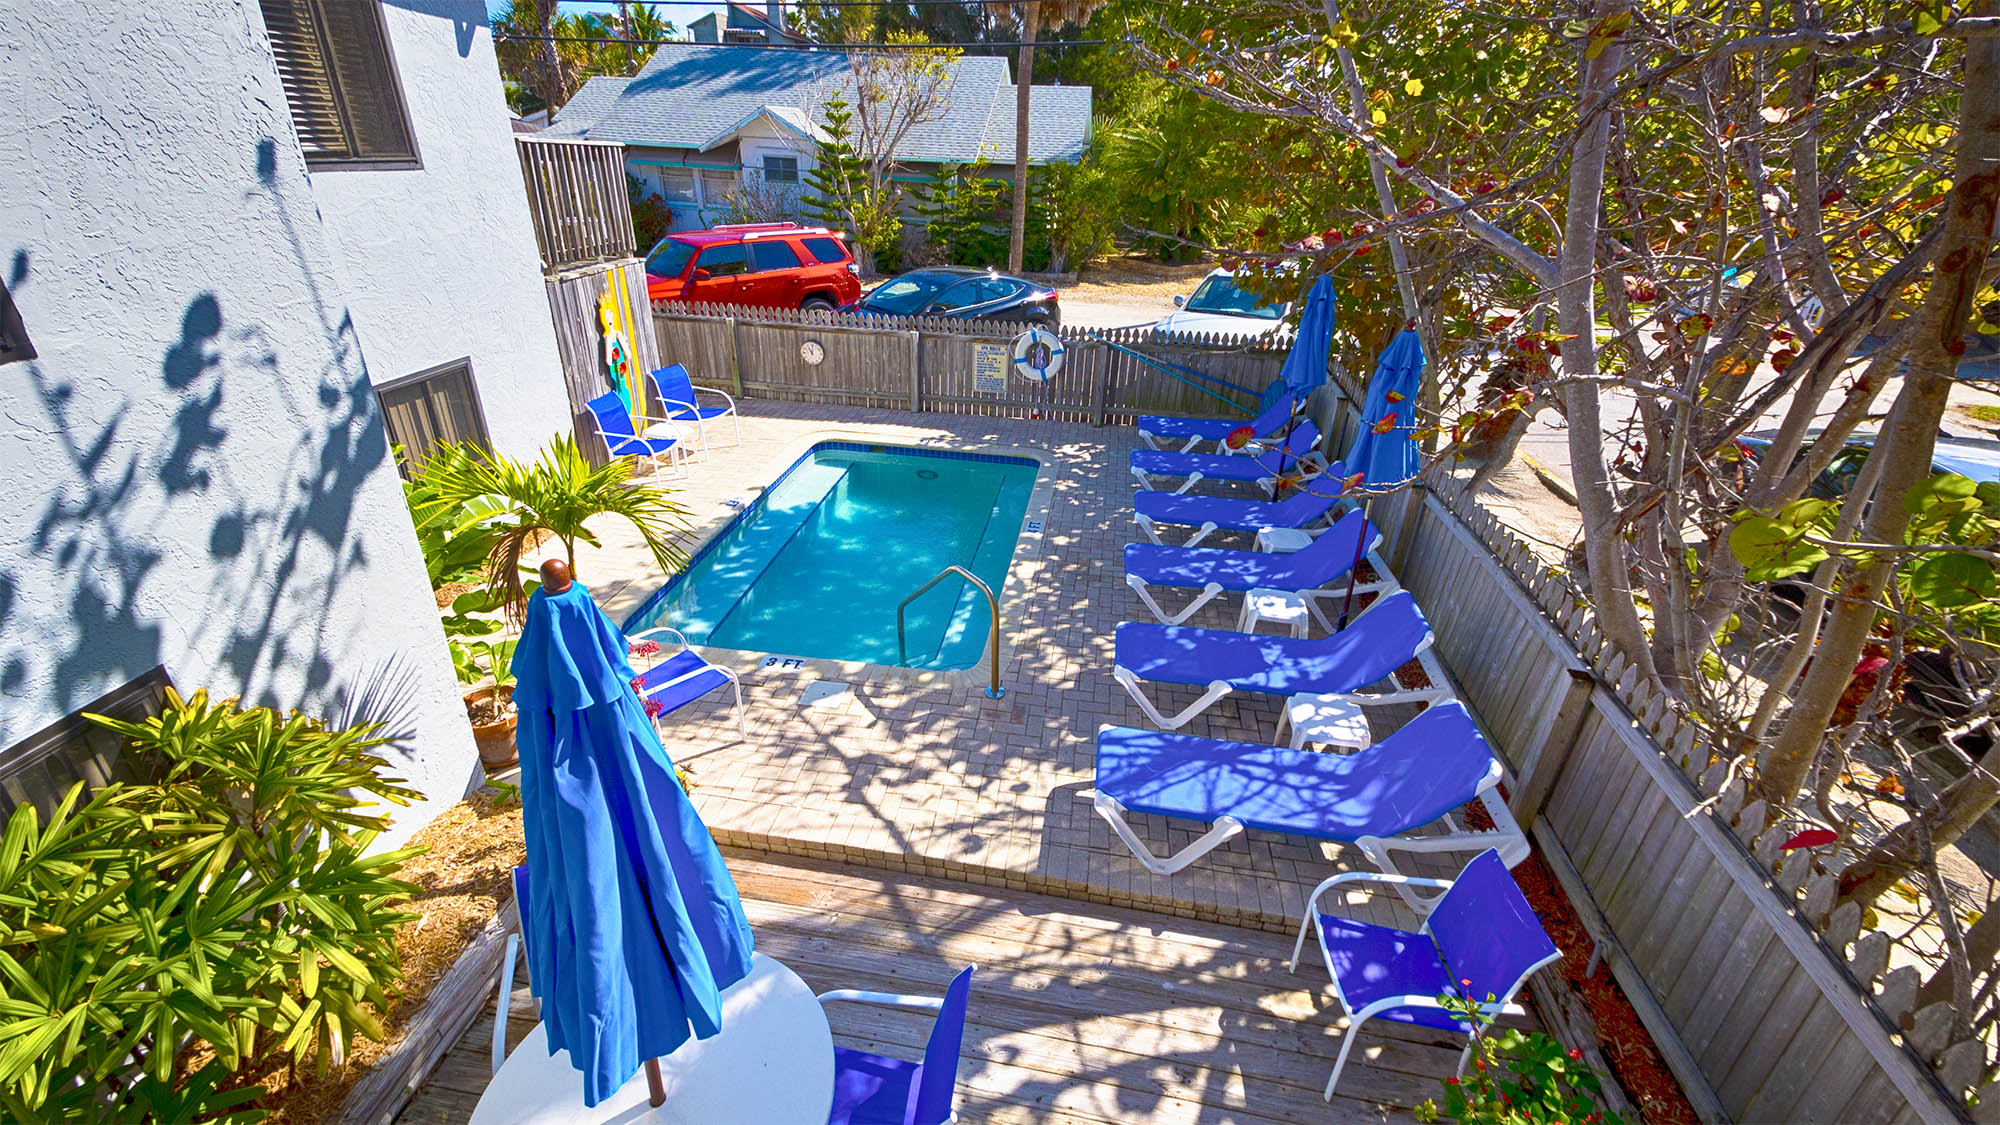 Overhead View of Pool Area With Loungers